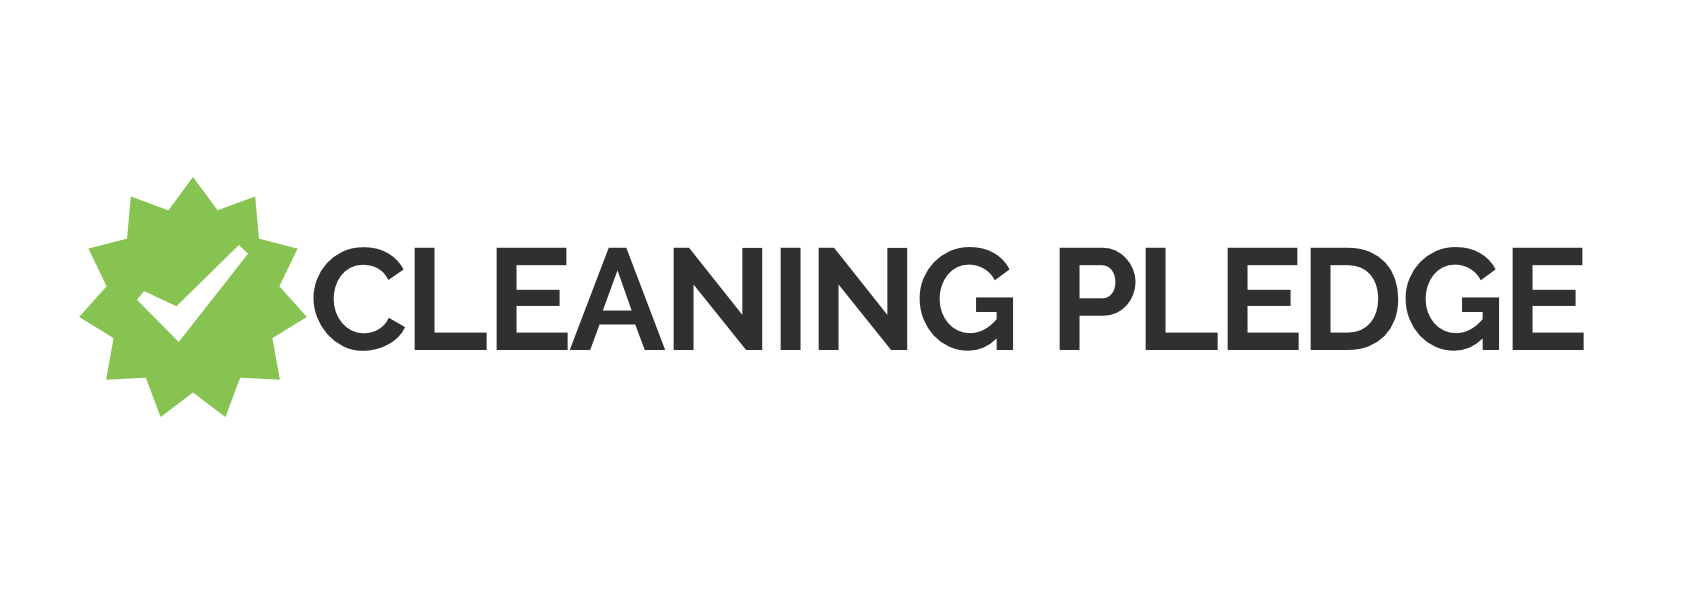 Verified Cleaning Pledge